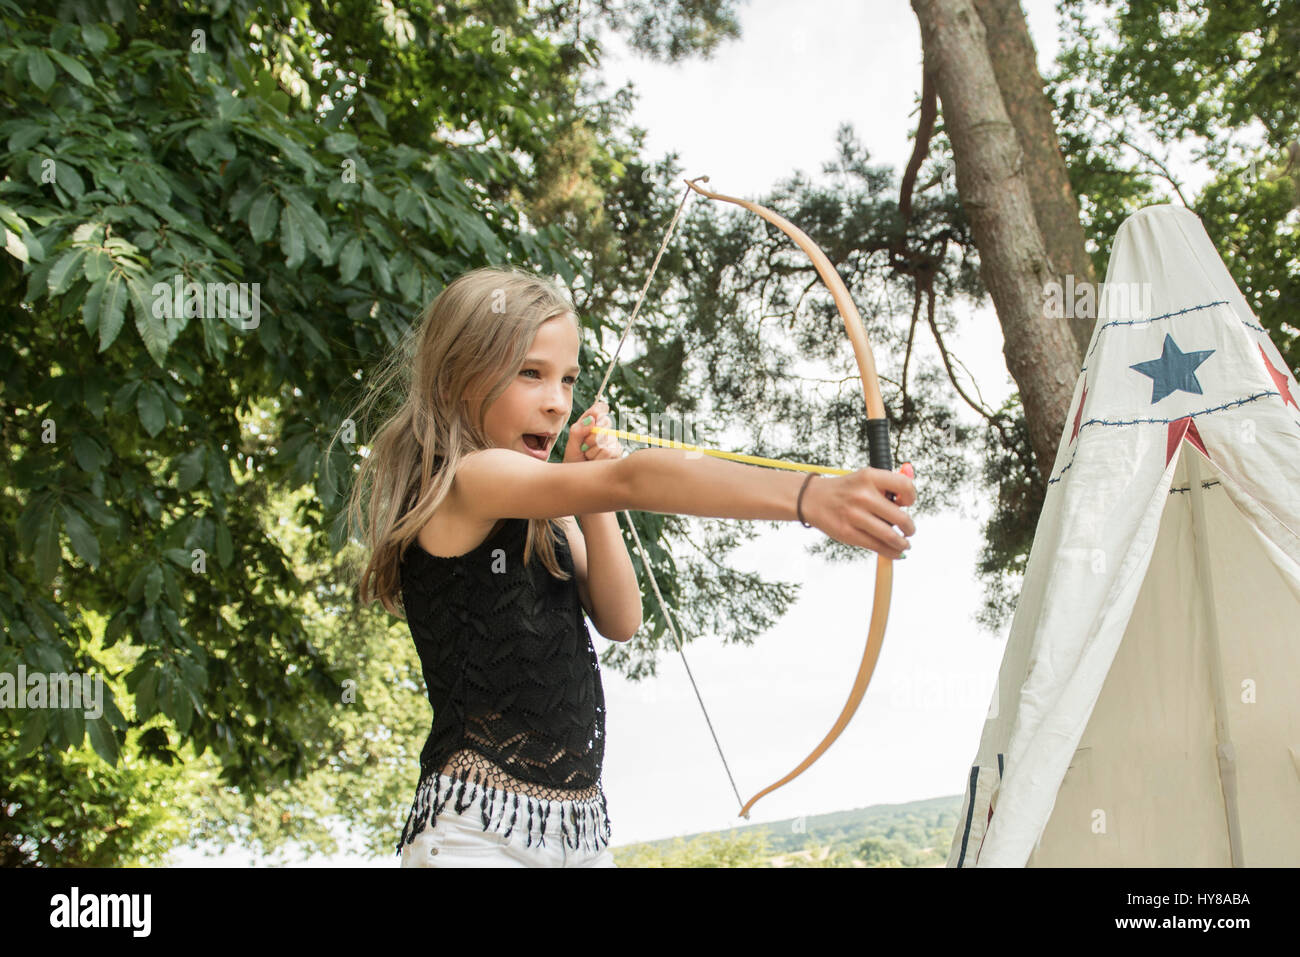 A young girl shoots a bow and arrow whilst playing outside Stock Photo